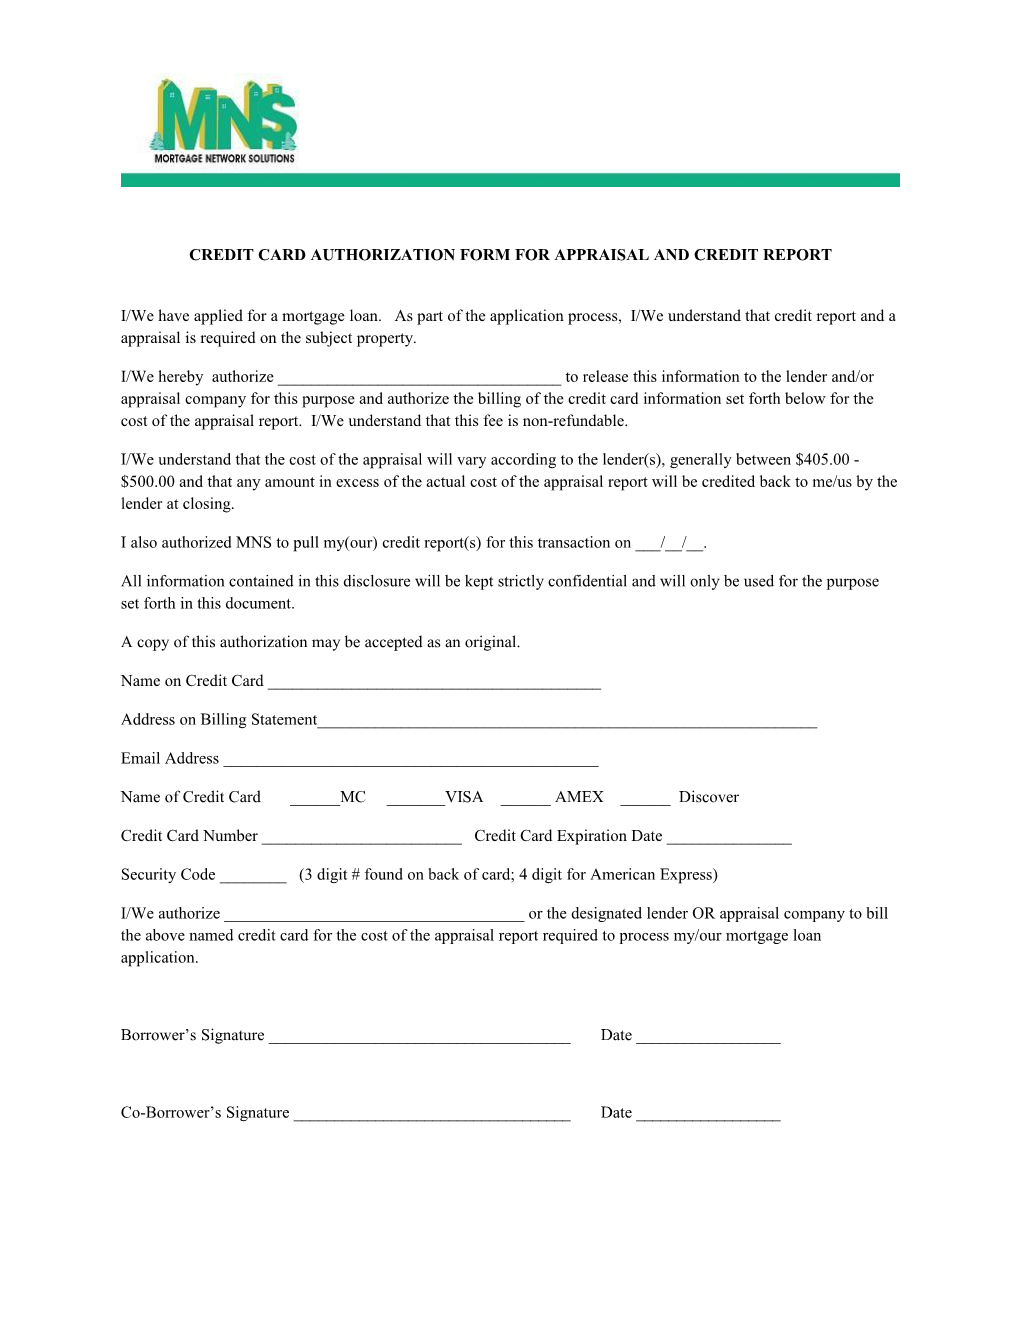 Credit Card Authorization Form for Appraisal and Credit Report